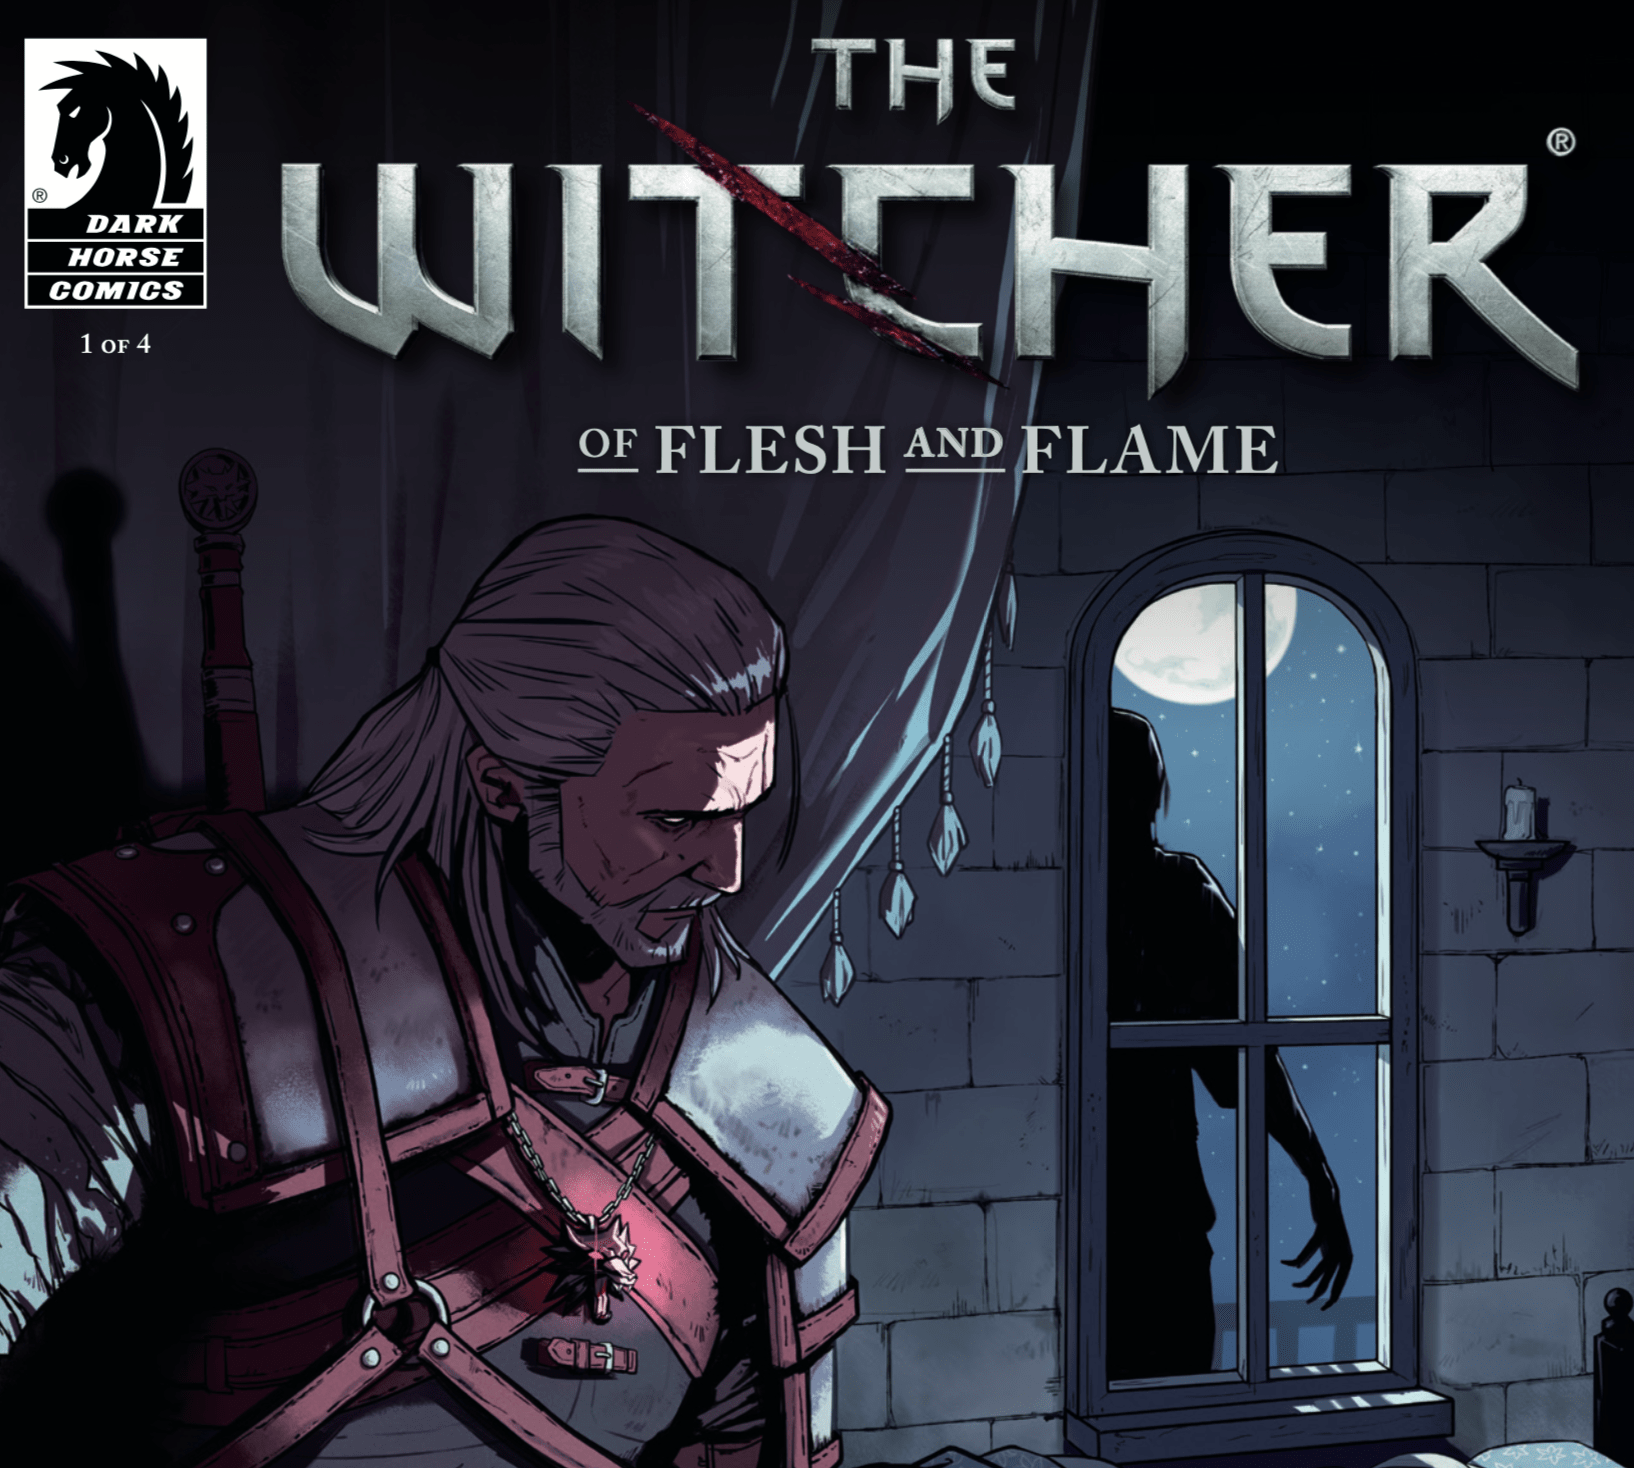 The Witcher: Of Flesh and Flame #1 review